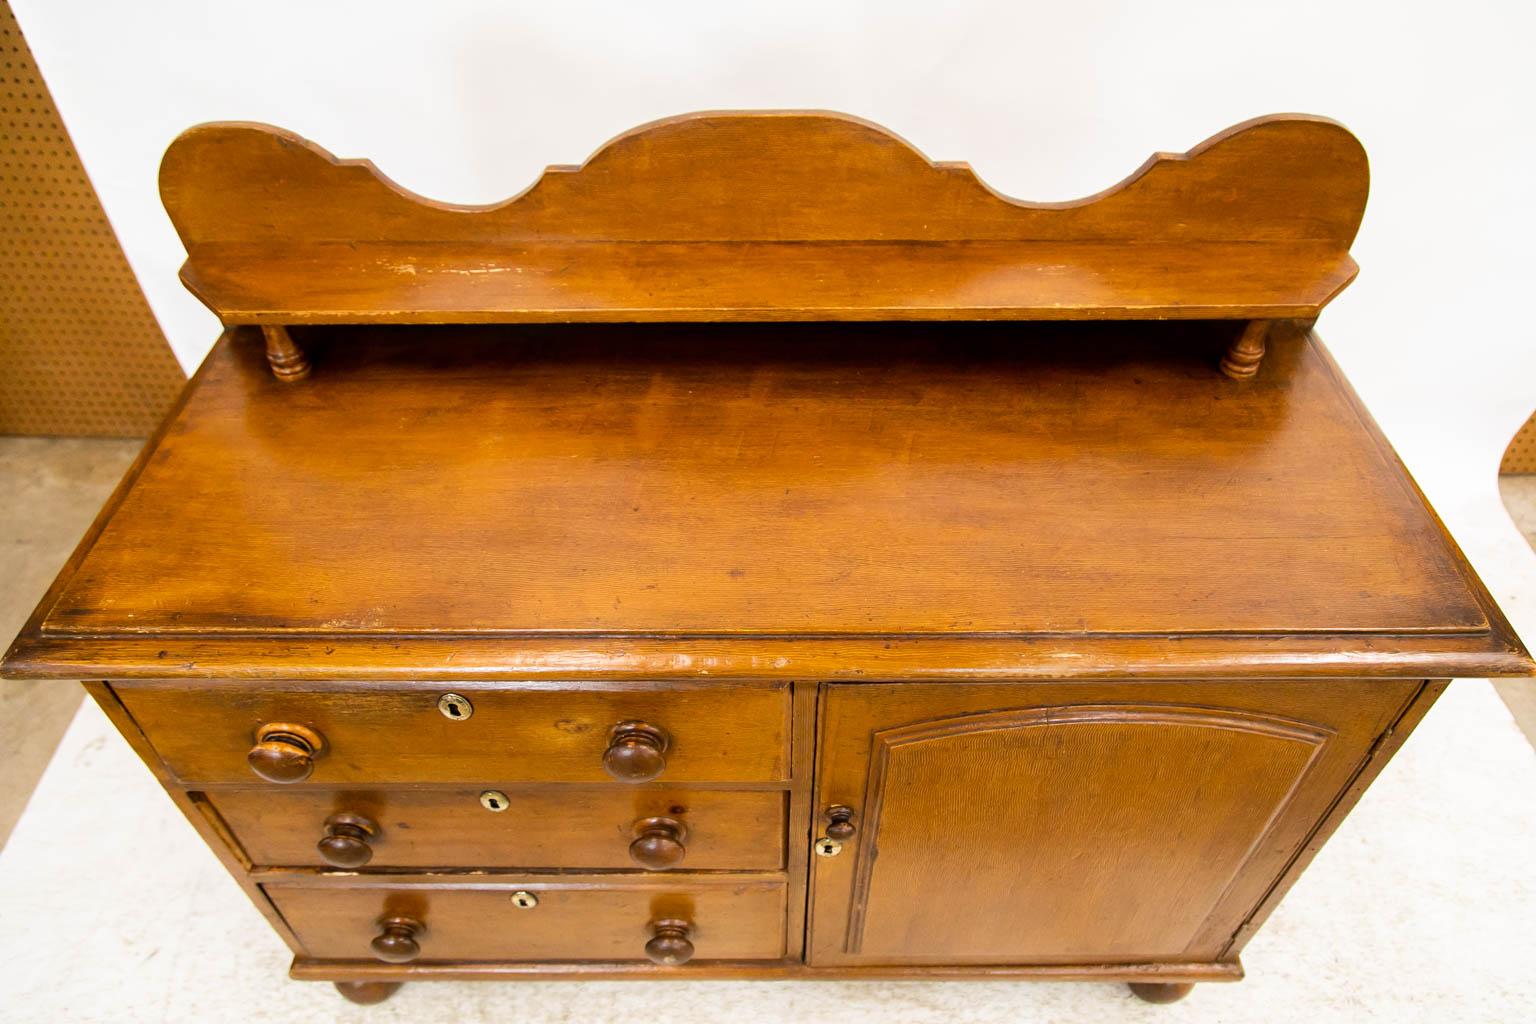 This server has a scalloped rear gallery that has a 4 1/2-inch shelf supported by short turned columns. It has been painted to simulate light oak. The door has a raised arched panel framed with a molded edge. All hardware is original except the